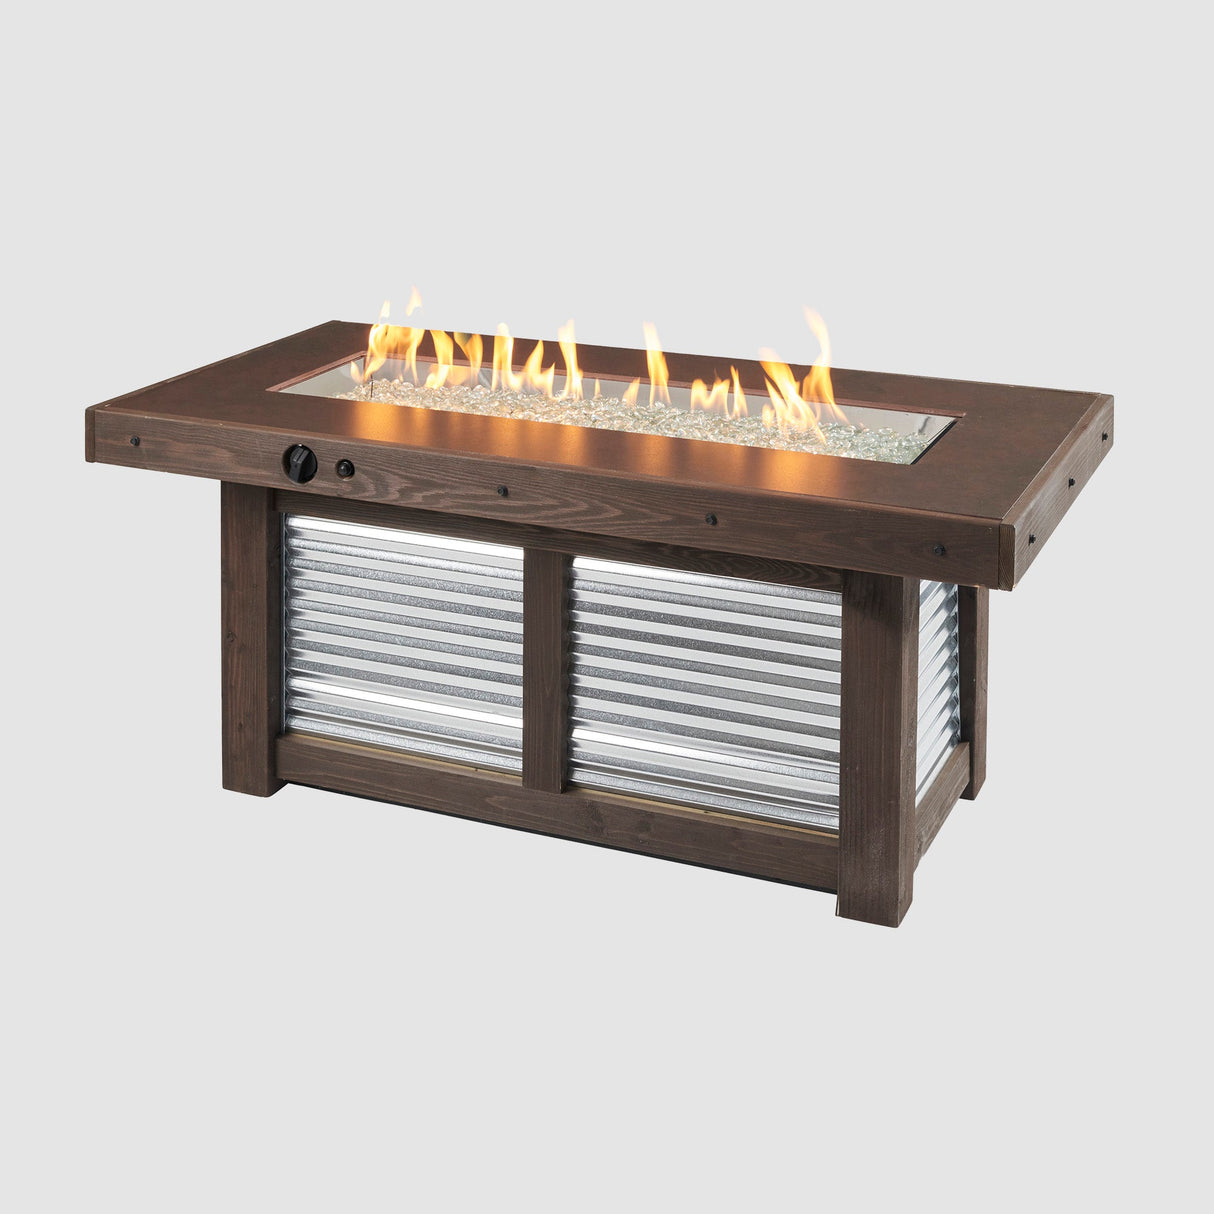 Denali Brew Linear Gas Fire Pit Table on a grey background